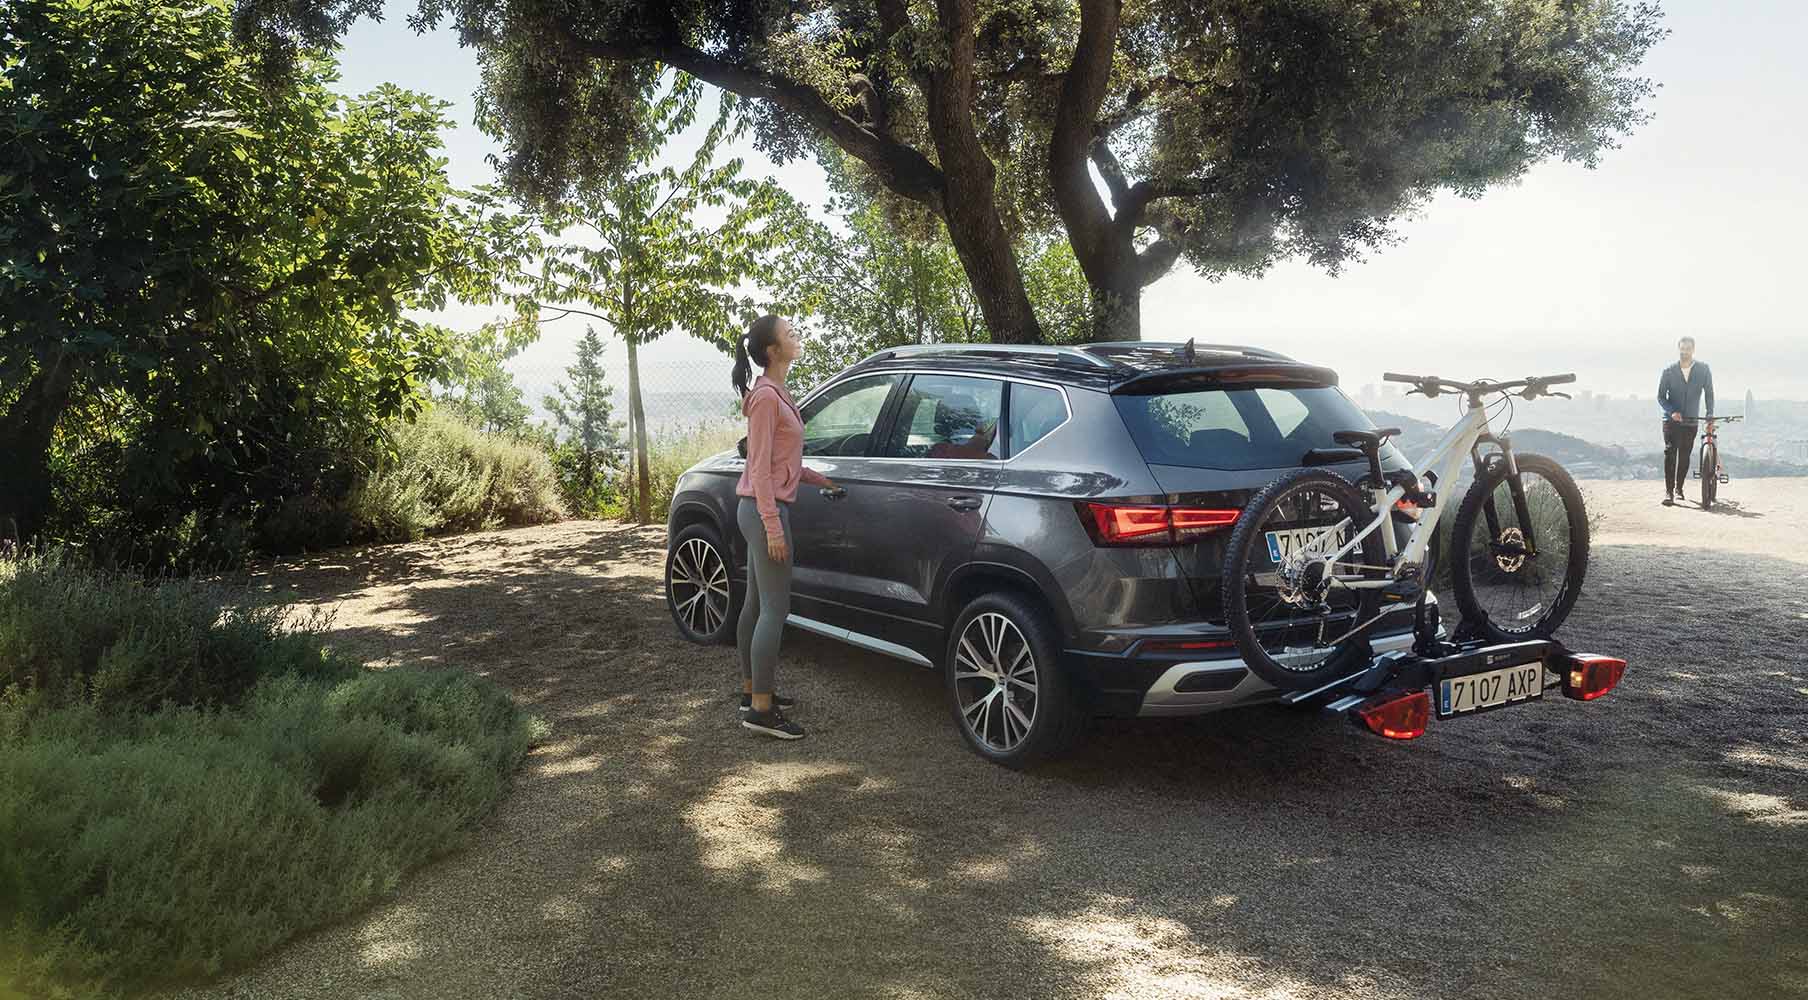 A SEAT Ateca 2024 parked on a shaded dirt road next to a large tree, equipped with a rear-mounted bike rack carrying two bicycles. A person stands beside the car, overlooking a distant seascape